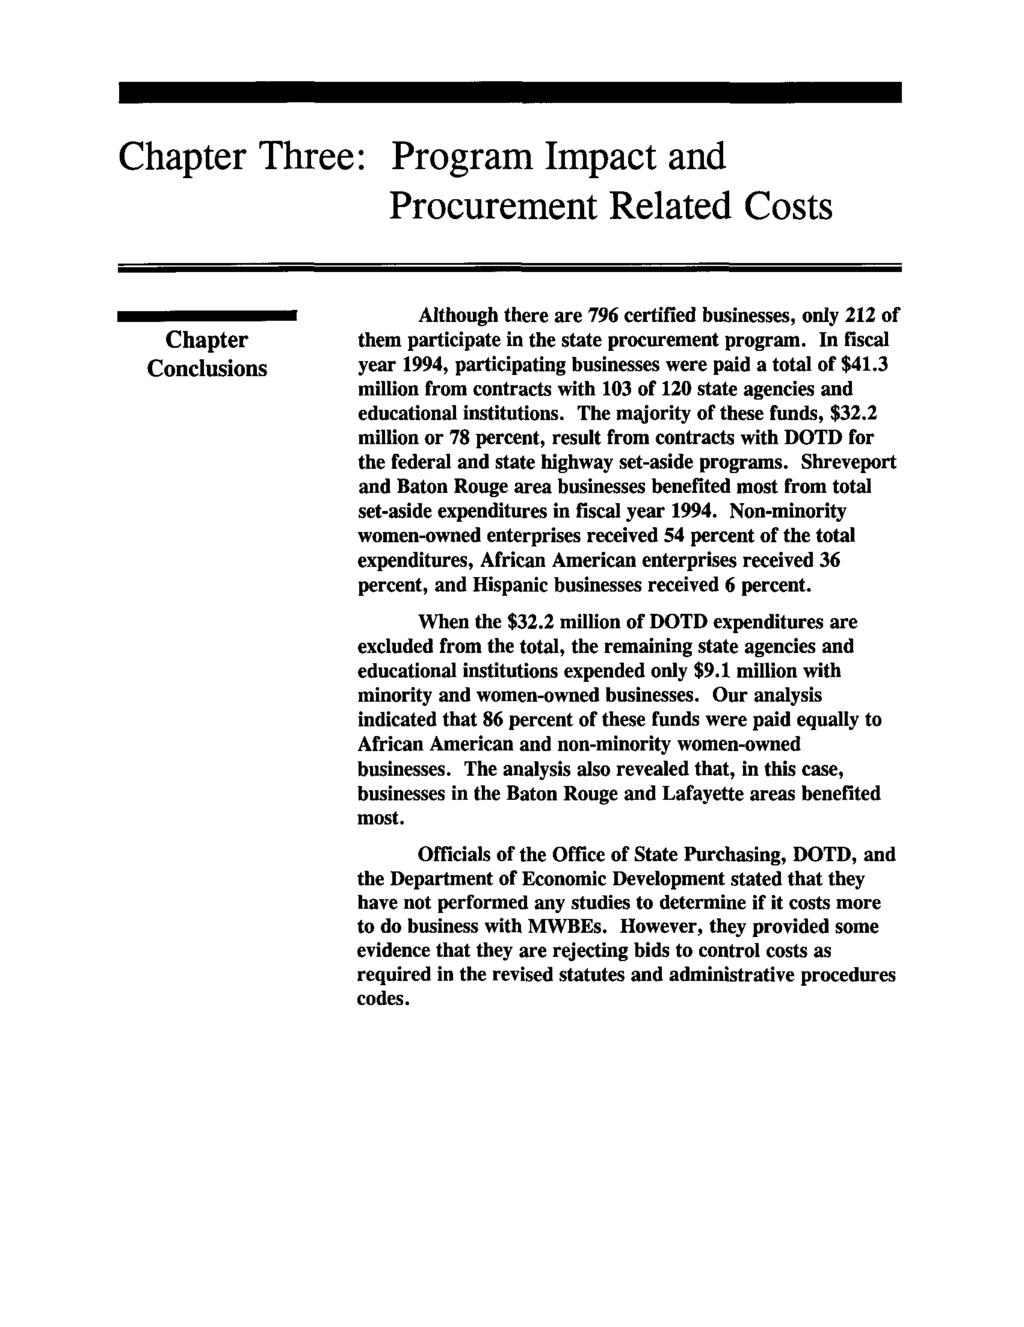 Chapter Three: Program Impact and Procurement Related Costs Chapter Conclusions Although there are 796 certified businesses, only 212 of them participate in the state procurement program.